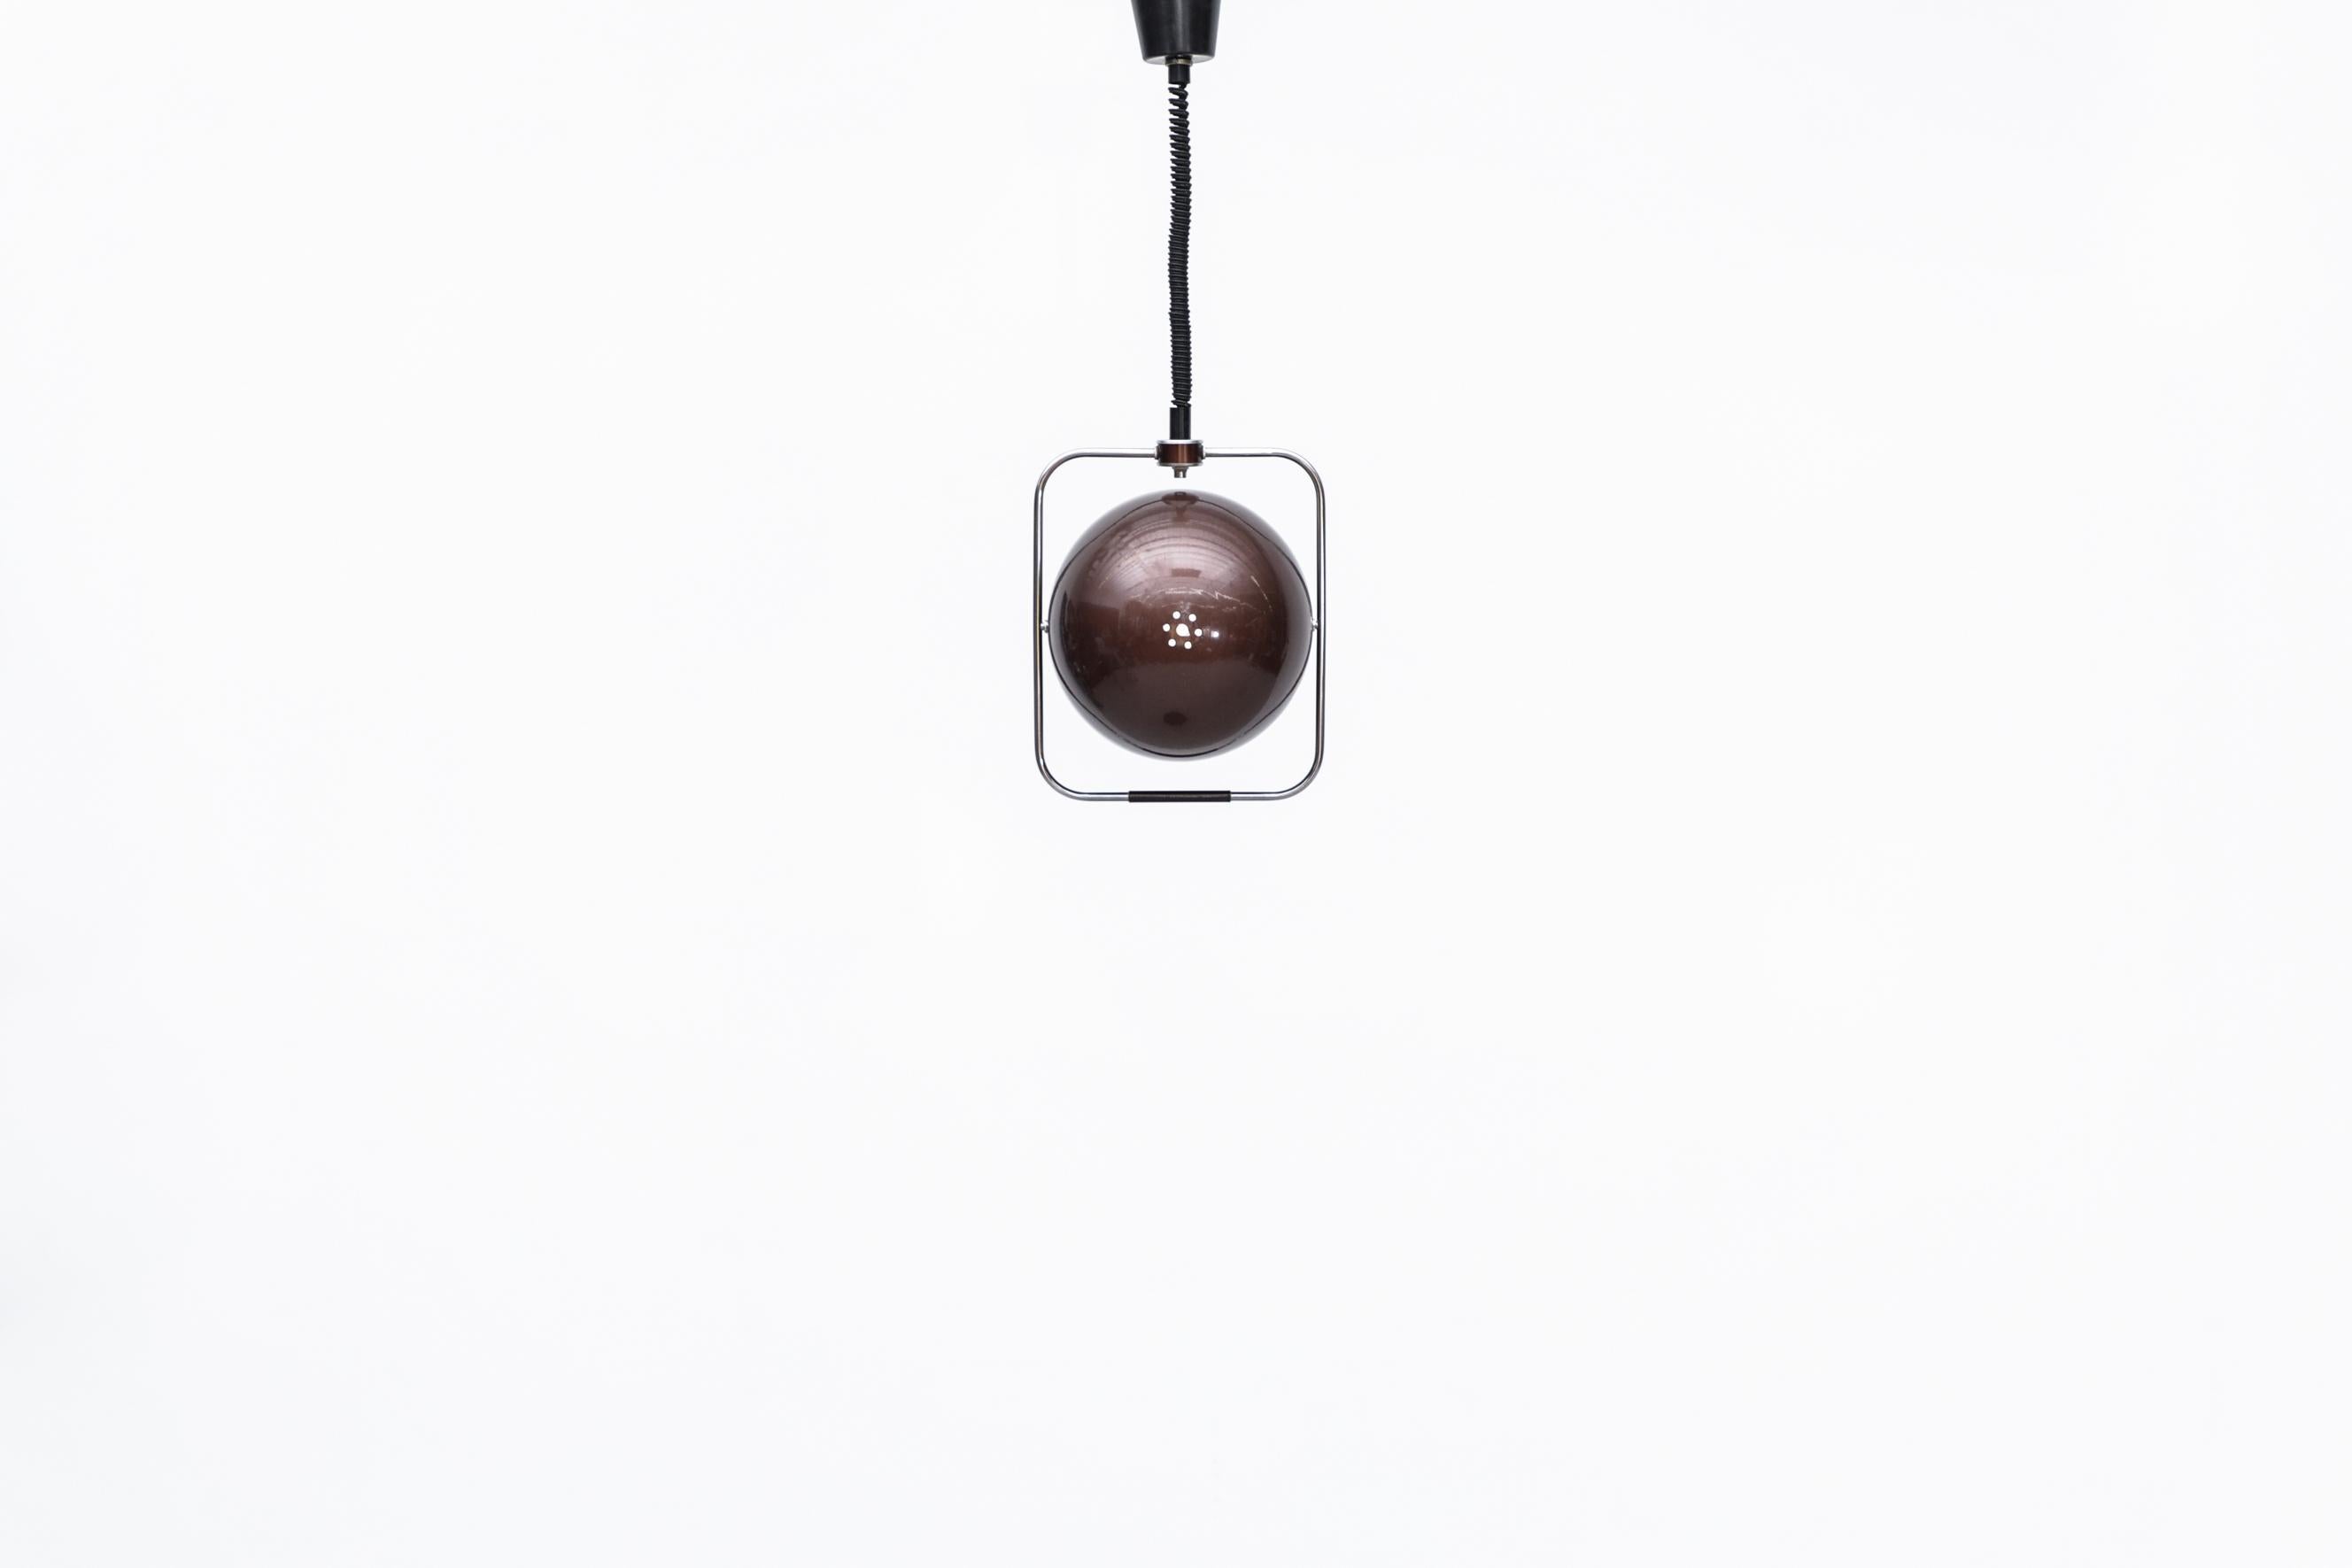 Midcentury Gepo pendant lamp with maroon metallic enameled globe sitting in square chrome frame. The canopy houses a pulley allowing the telephone cord-like wire to extend and retract as needed. The chrome frame has a built in handle for height